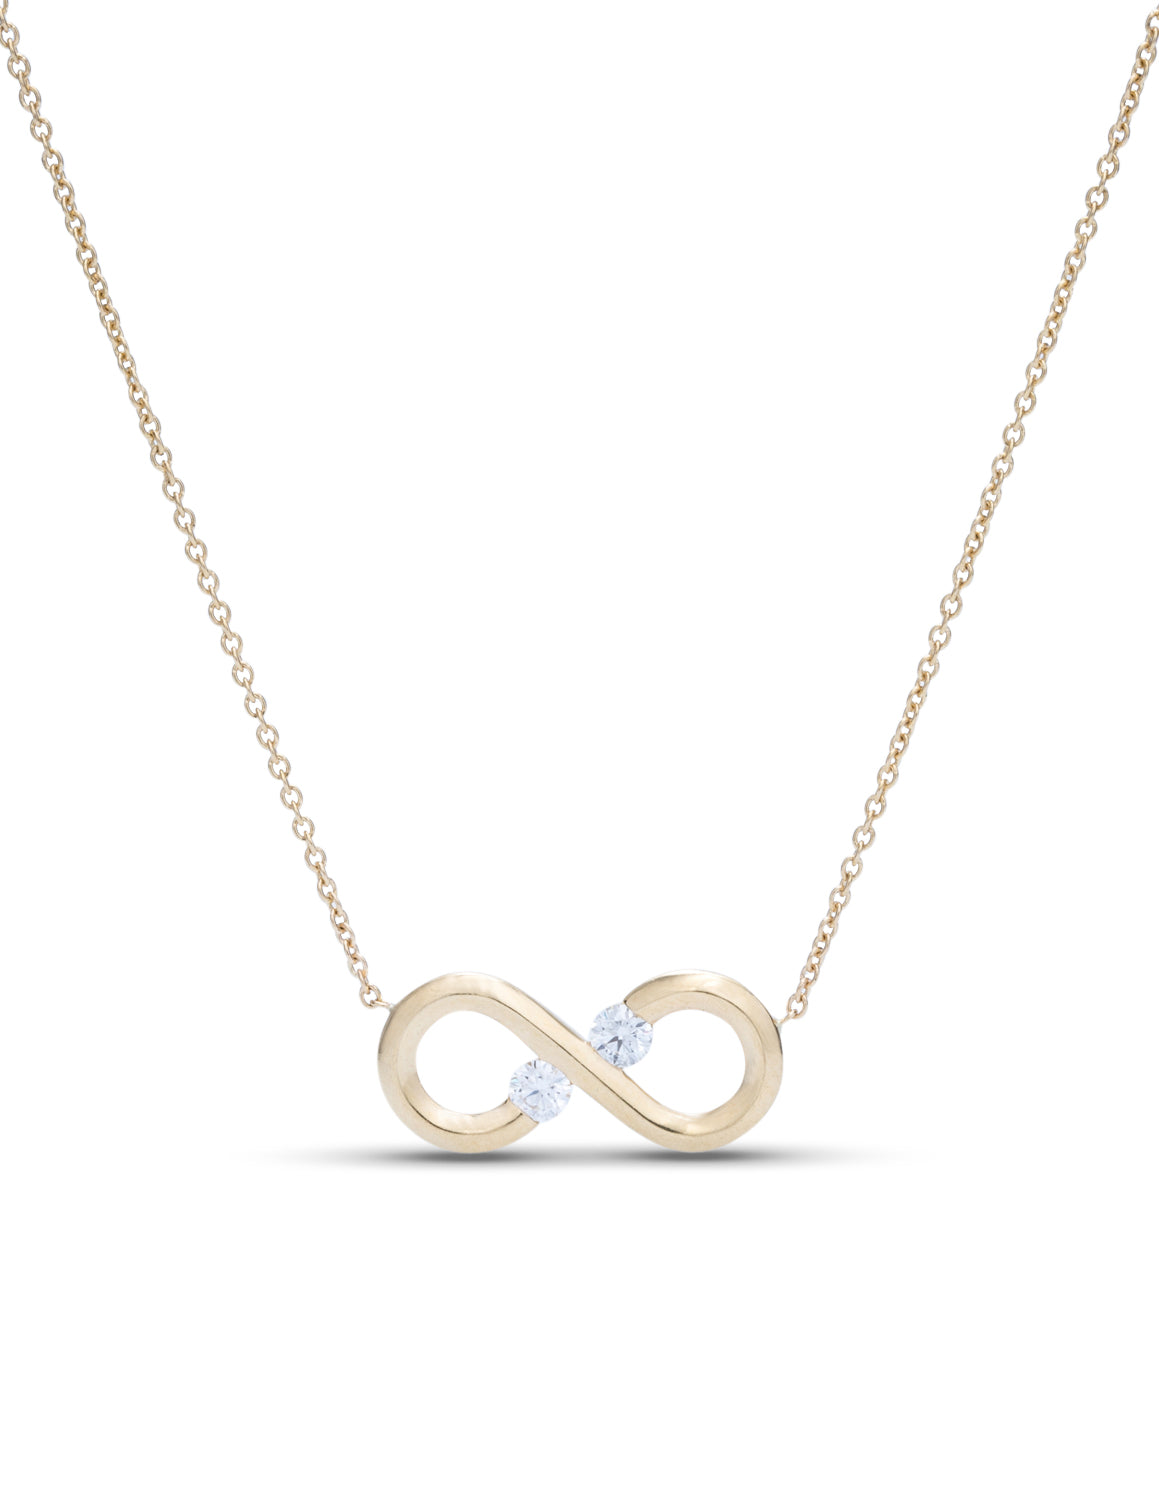 Yellow Gold Infinity Necklace - Charles Koll Jewellers